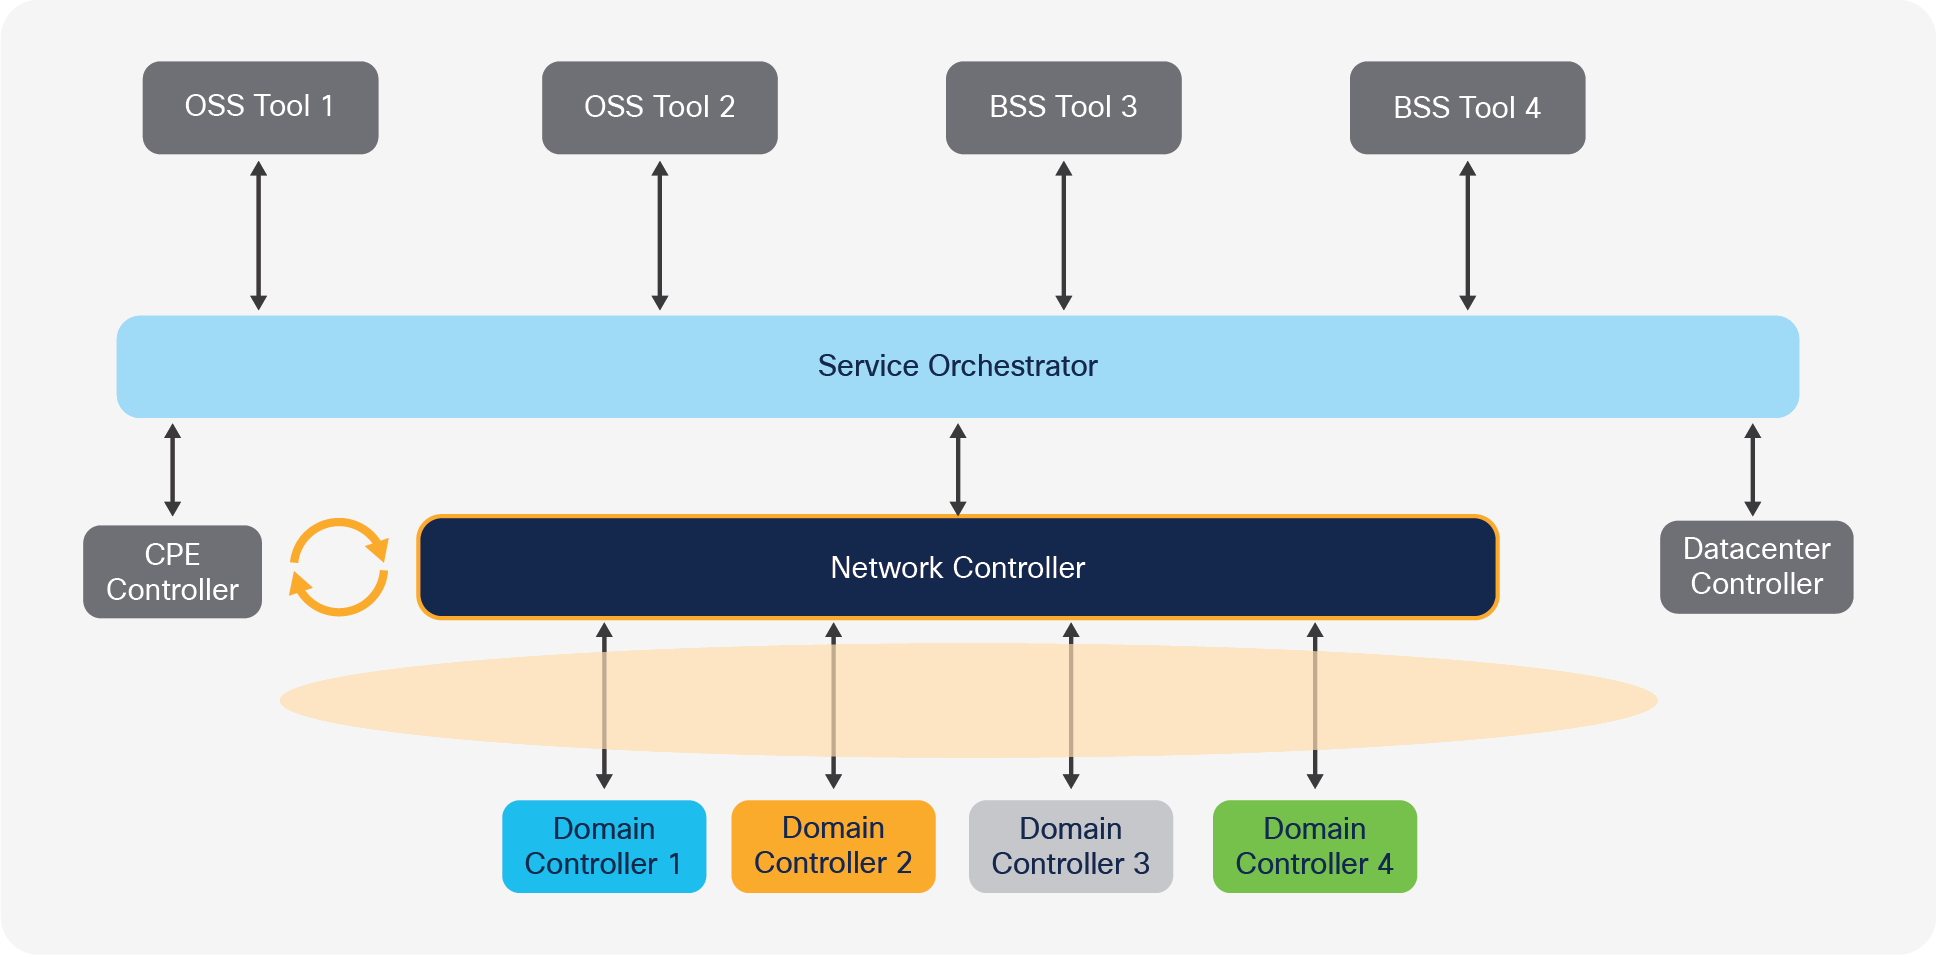 Integration effort needed to upgrade/replace the network controller